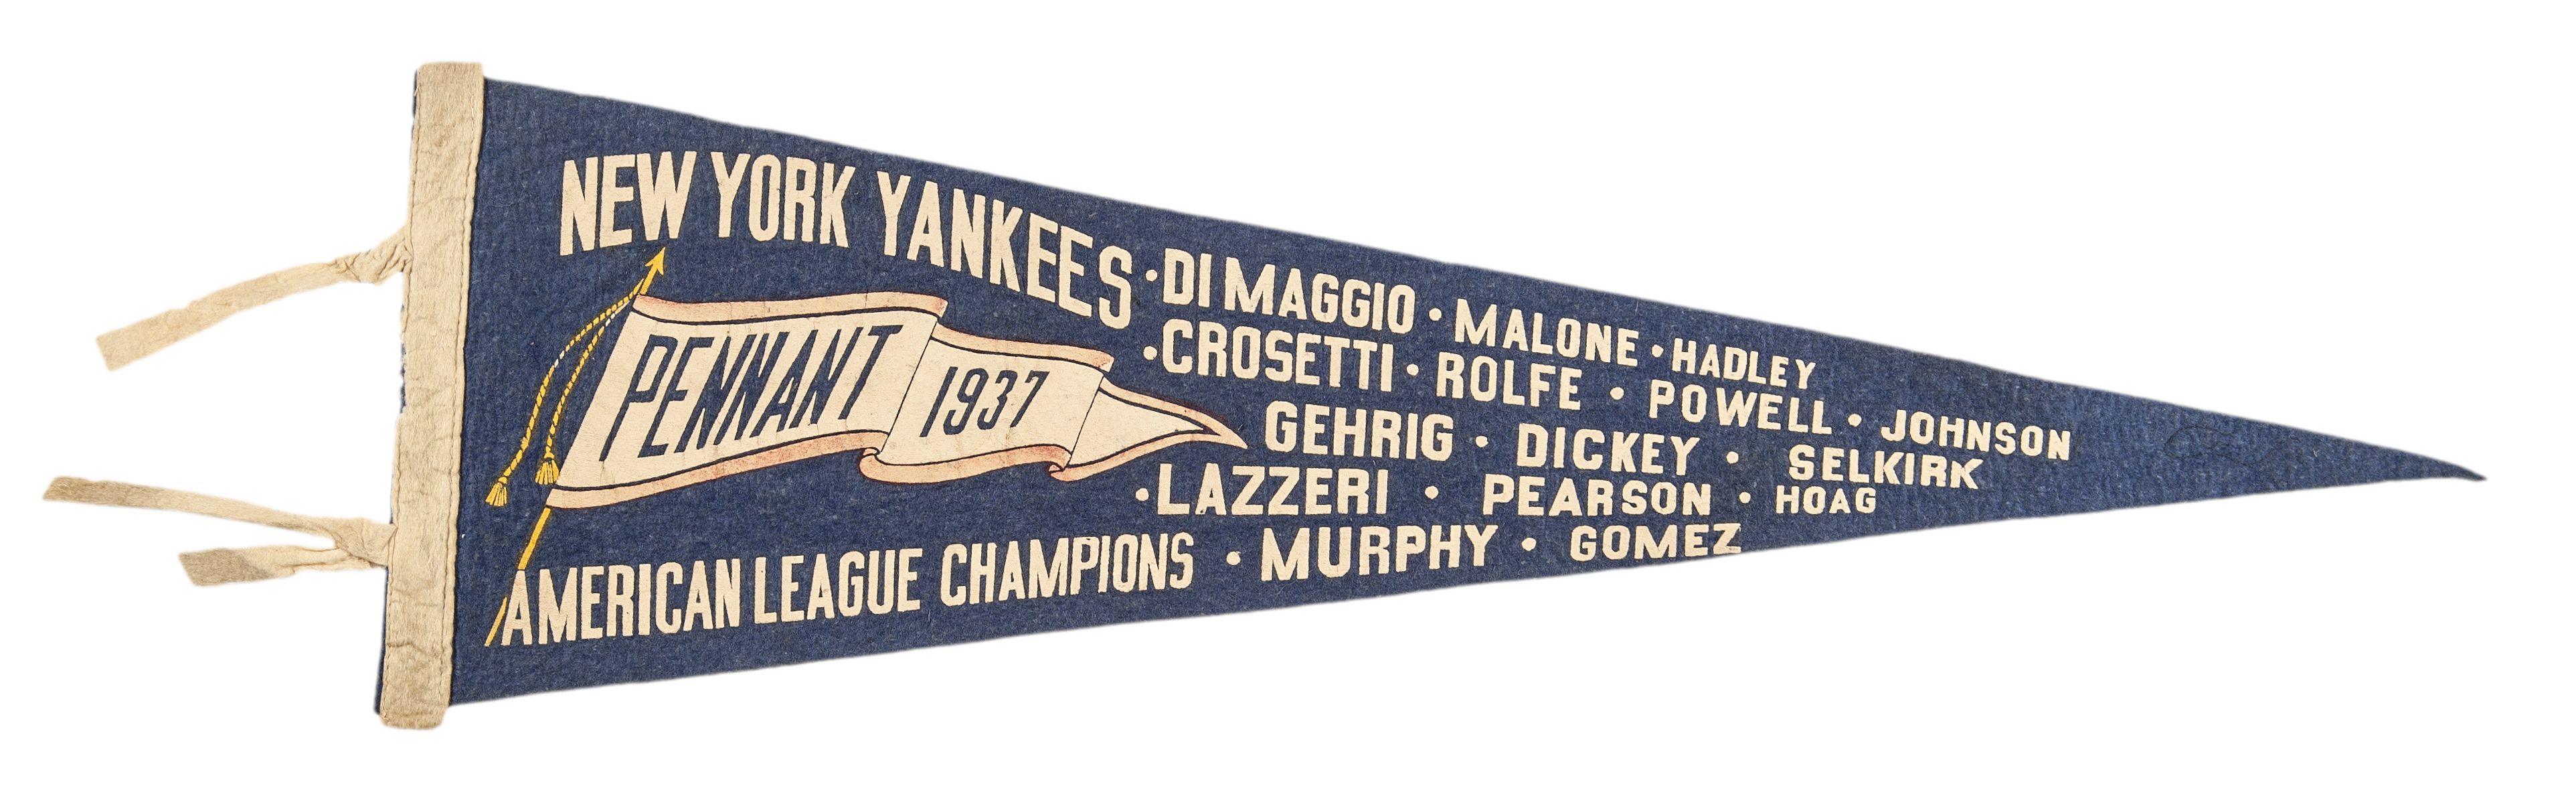 Image result for yankees pennant 1937